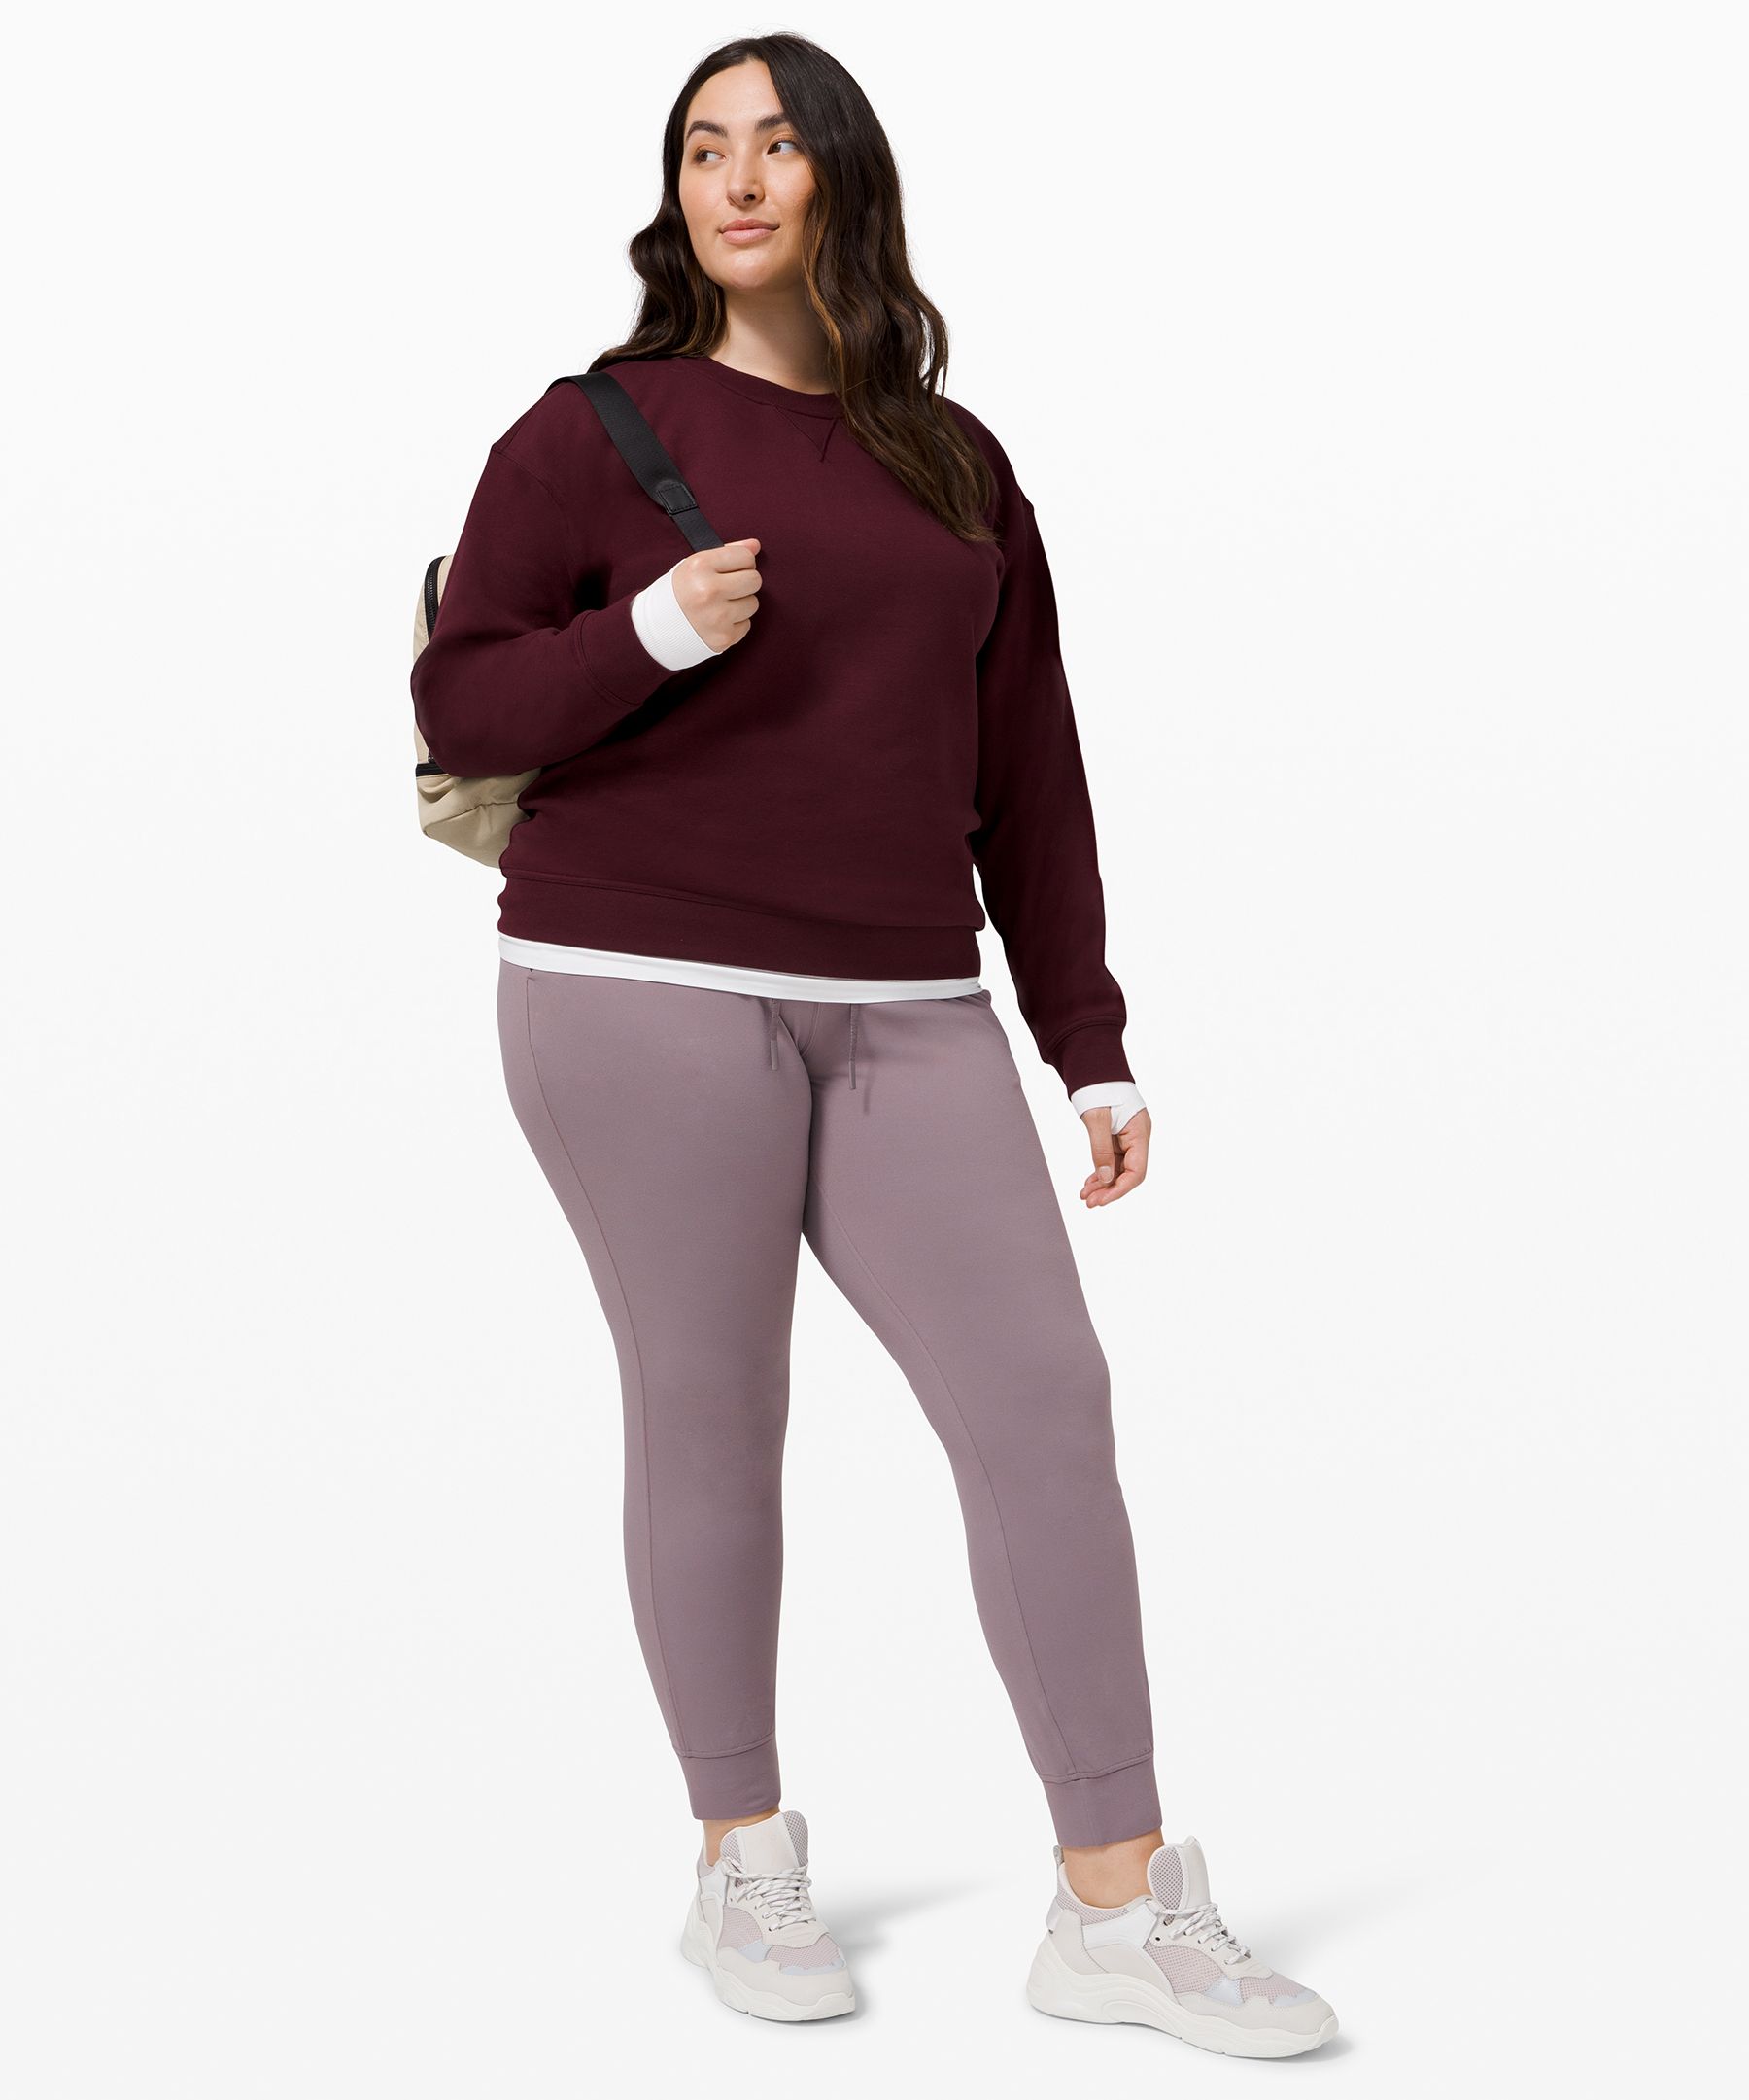 Guest Fit Review: Ready To Rulu Pant, Get Set LS - The Sweat Edit